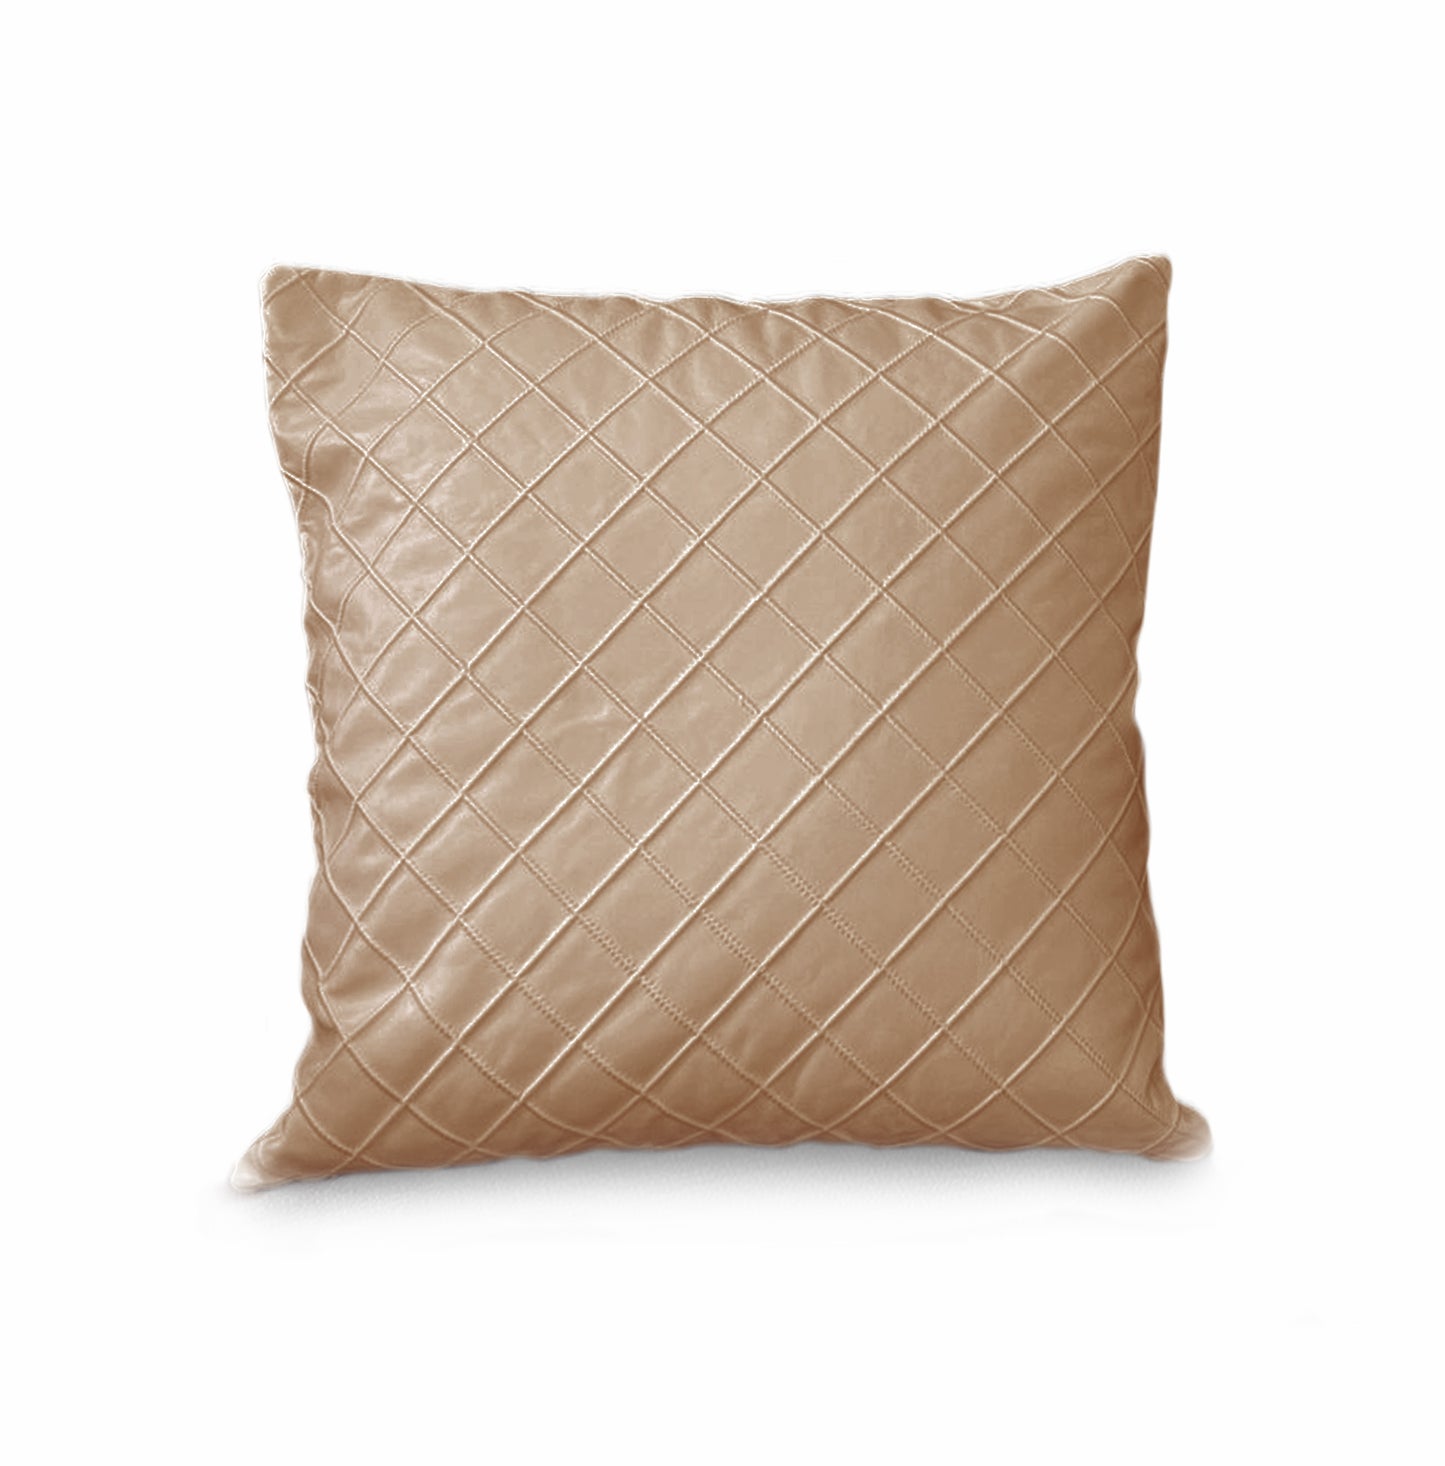 ST. BARTH LEATHER PILLOW CASE